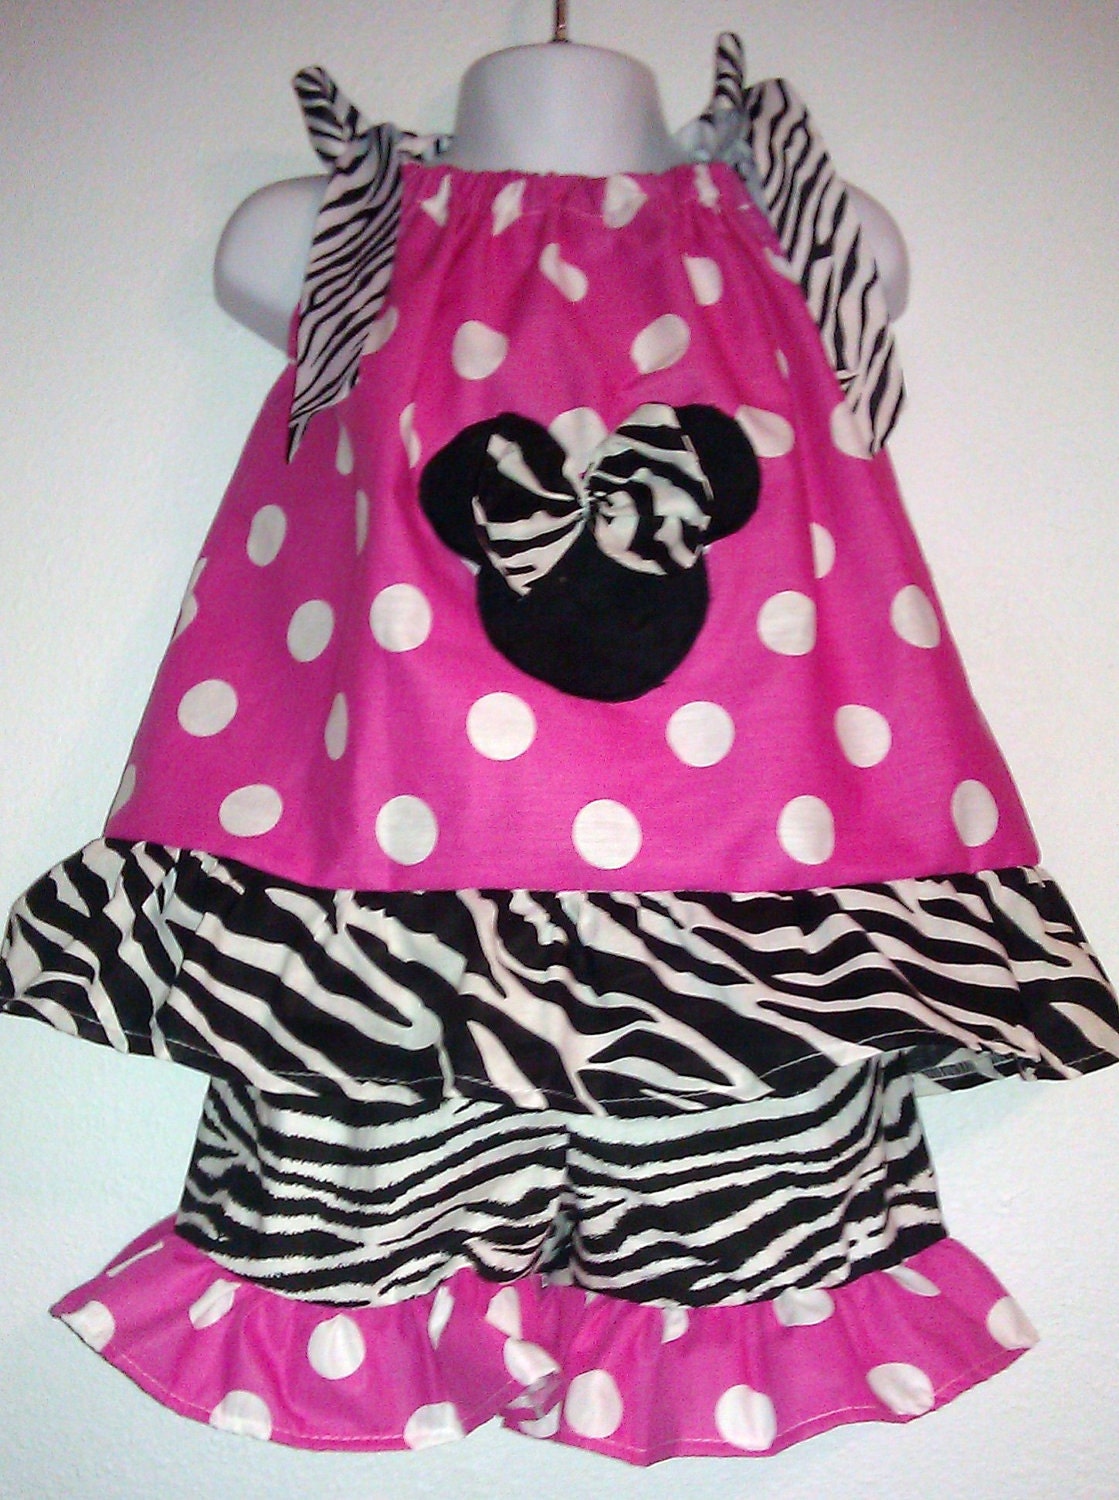 GIRLS MINNIE MOUSE HANDMADE PILLOW CASE DRESS TOP AND SHORTS